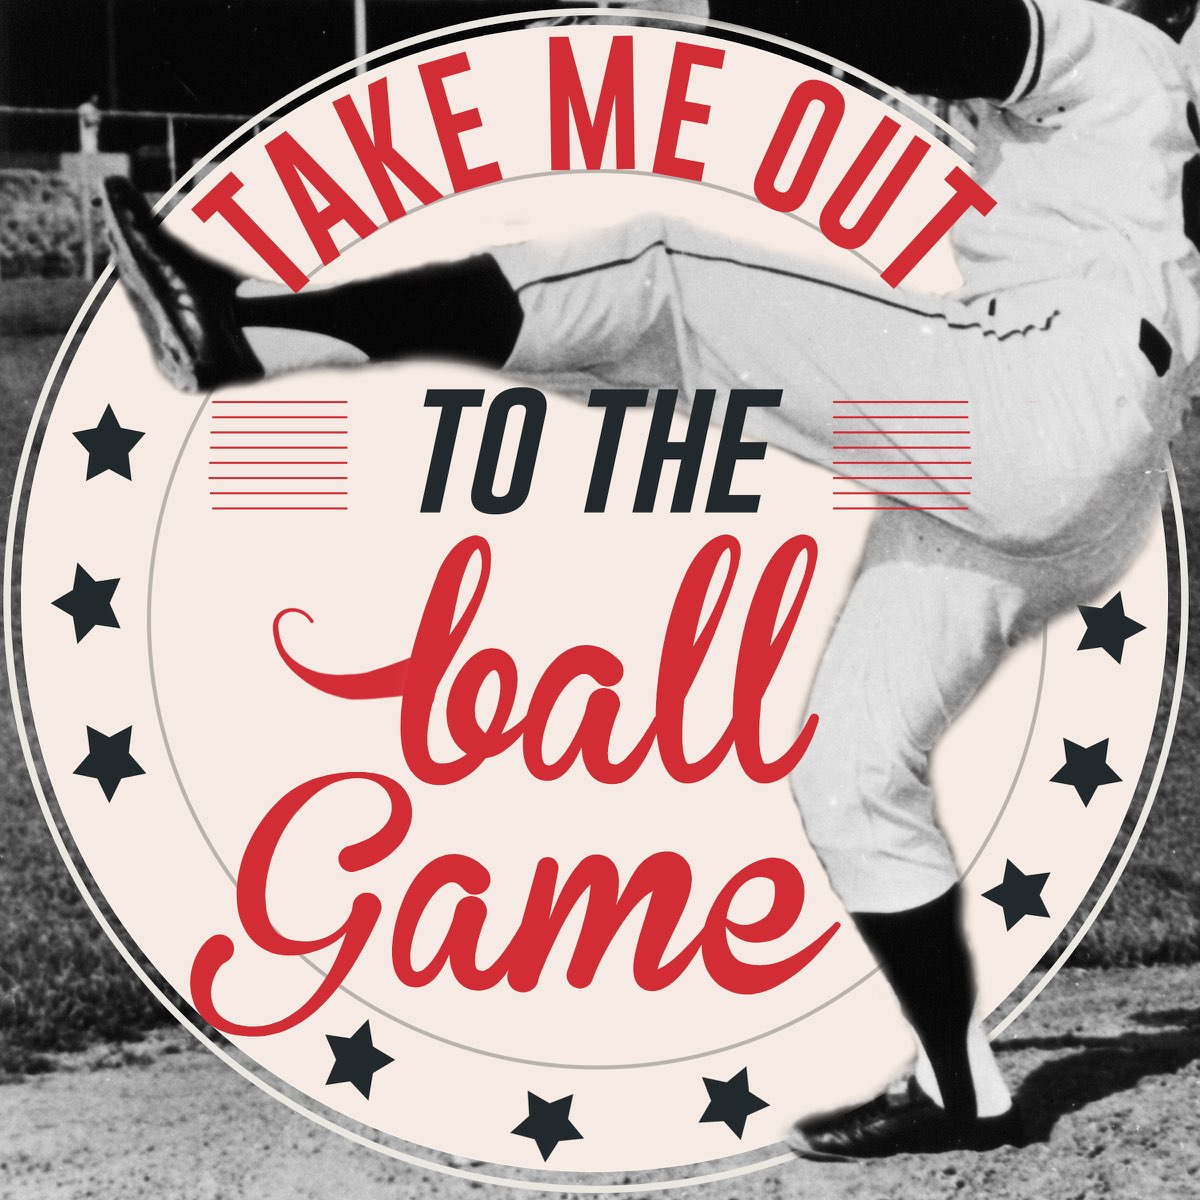 Take Me Out To The Ball Game - Single by The Play Backs.